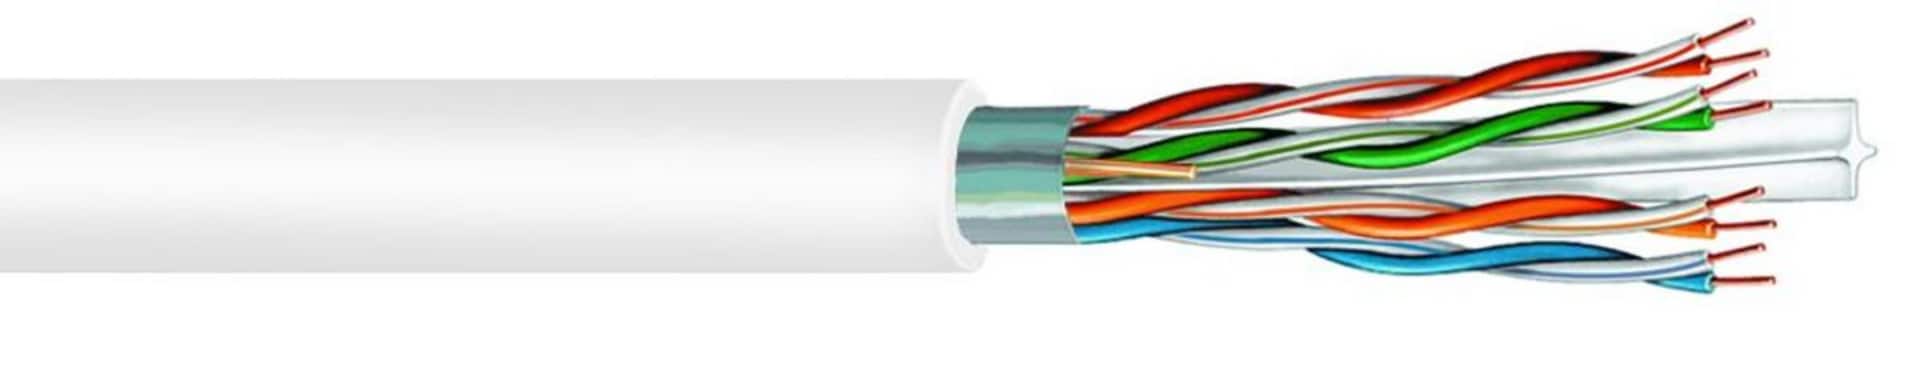 CommScope Uniprise 1000' CAT6 F/UTP Shielded Plenum Twisted Pair Cable - White